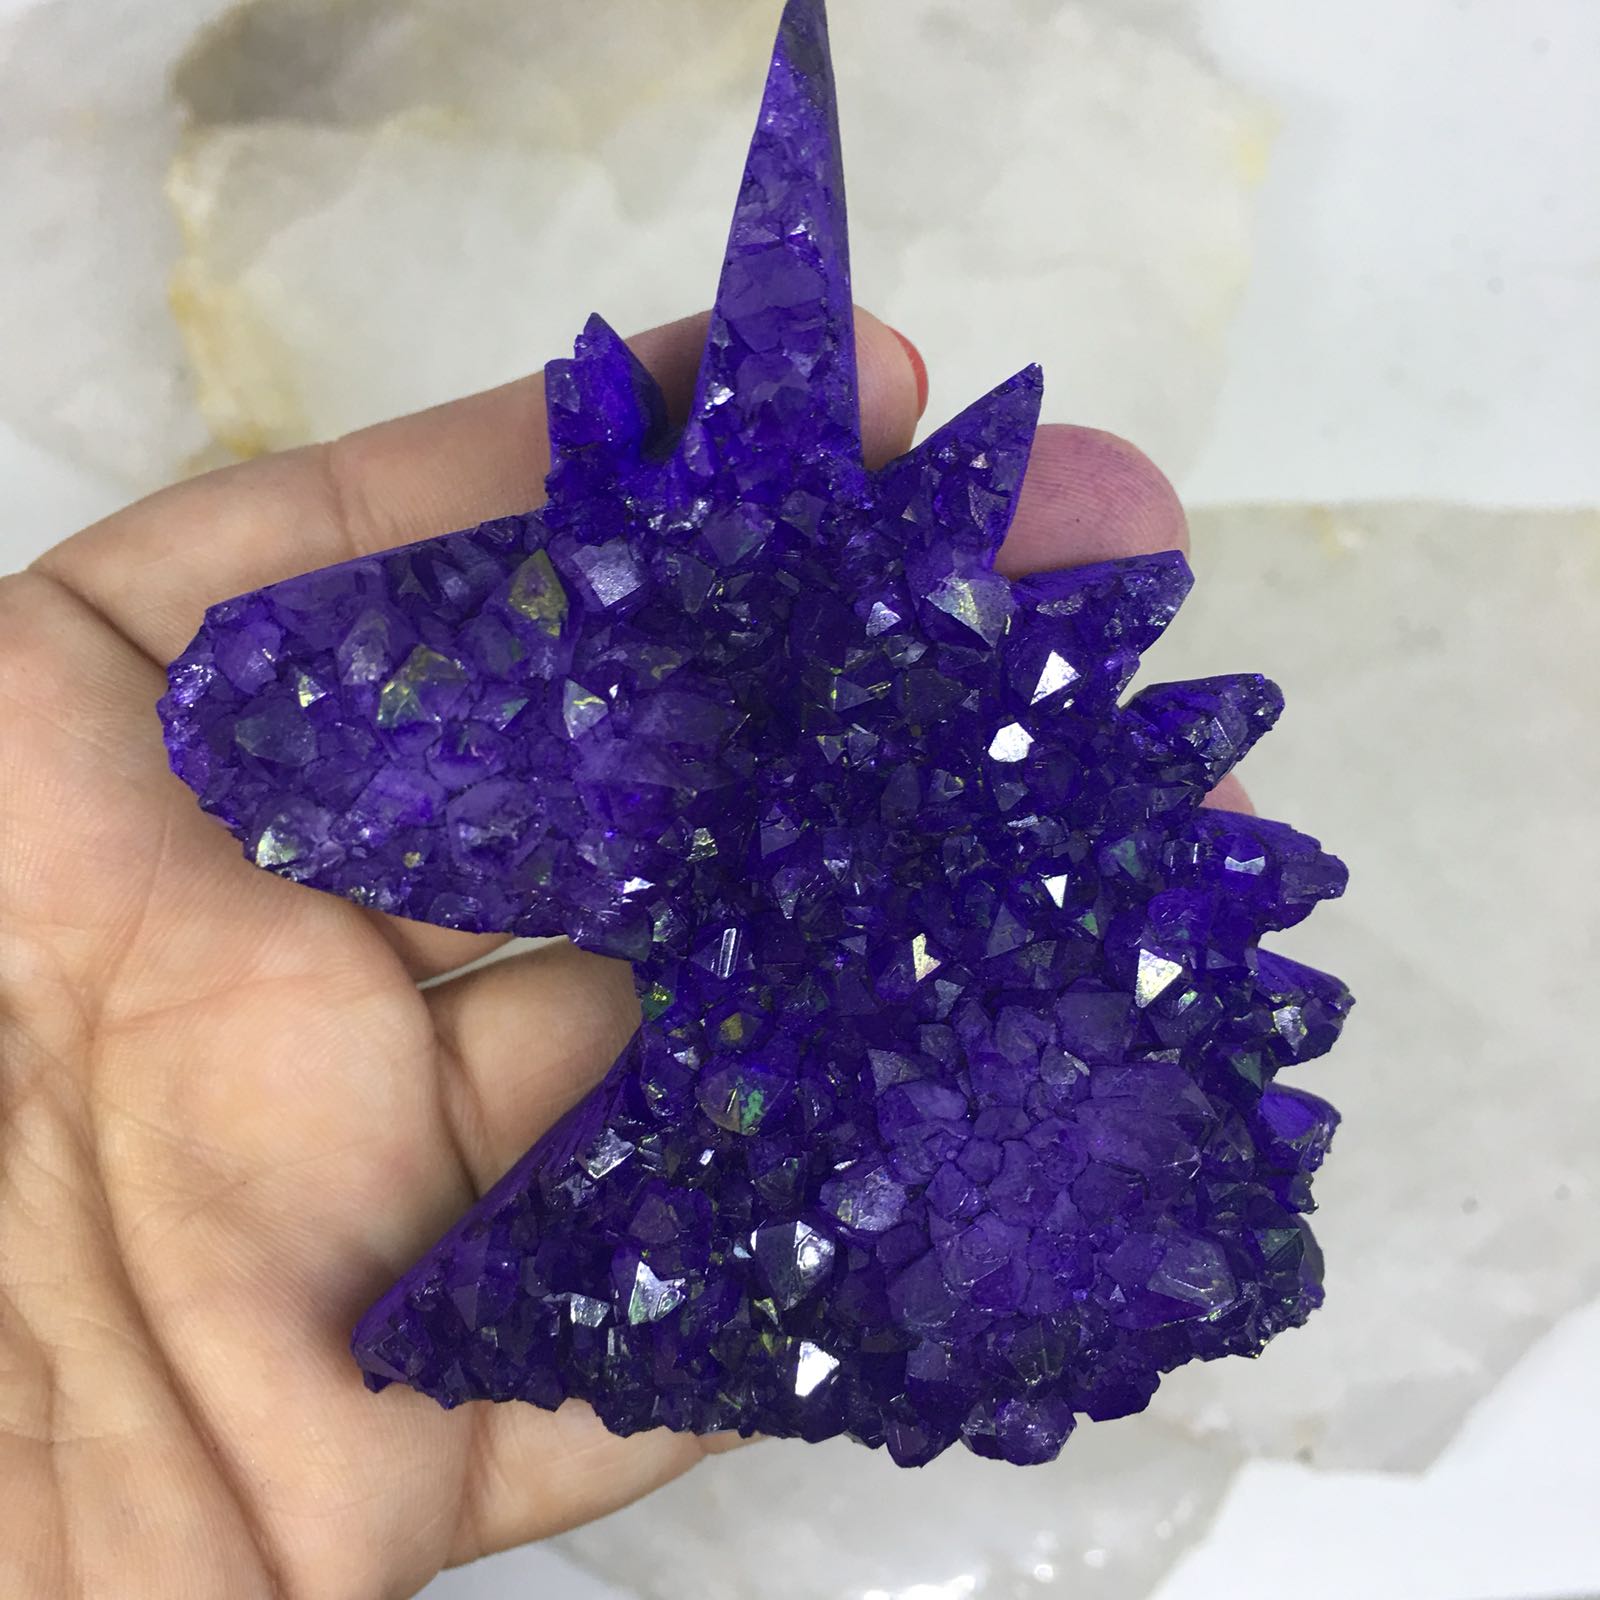 Stones from Uruguay - Purple Dyed Amethyst Druse Unicorn for Decor and Home